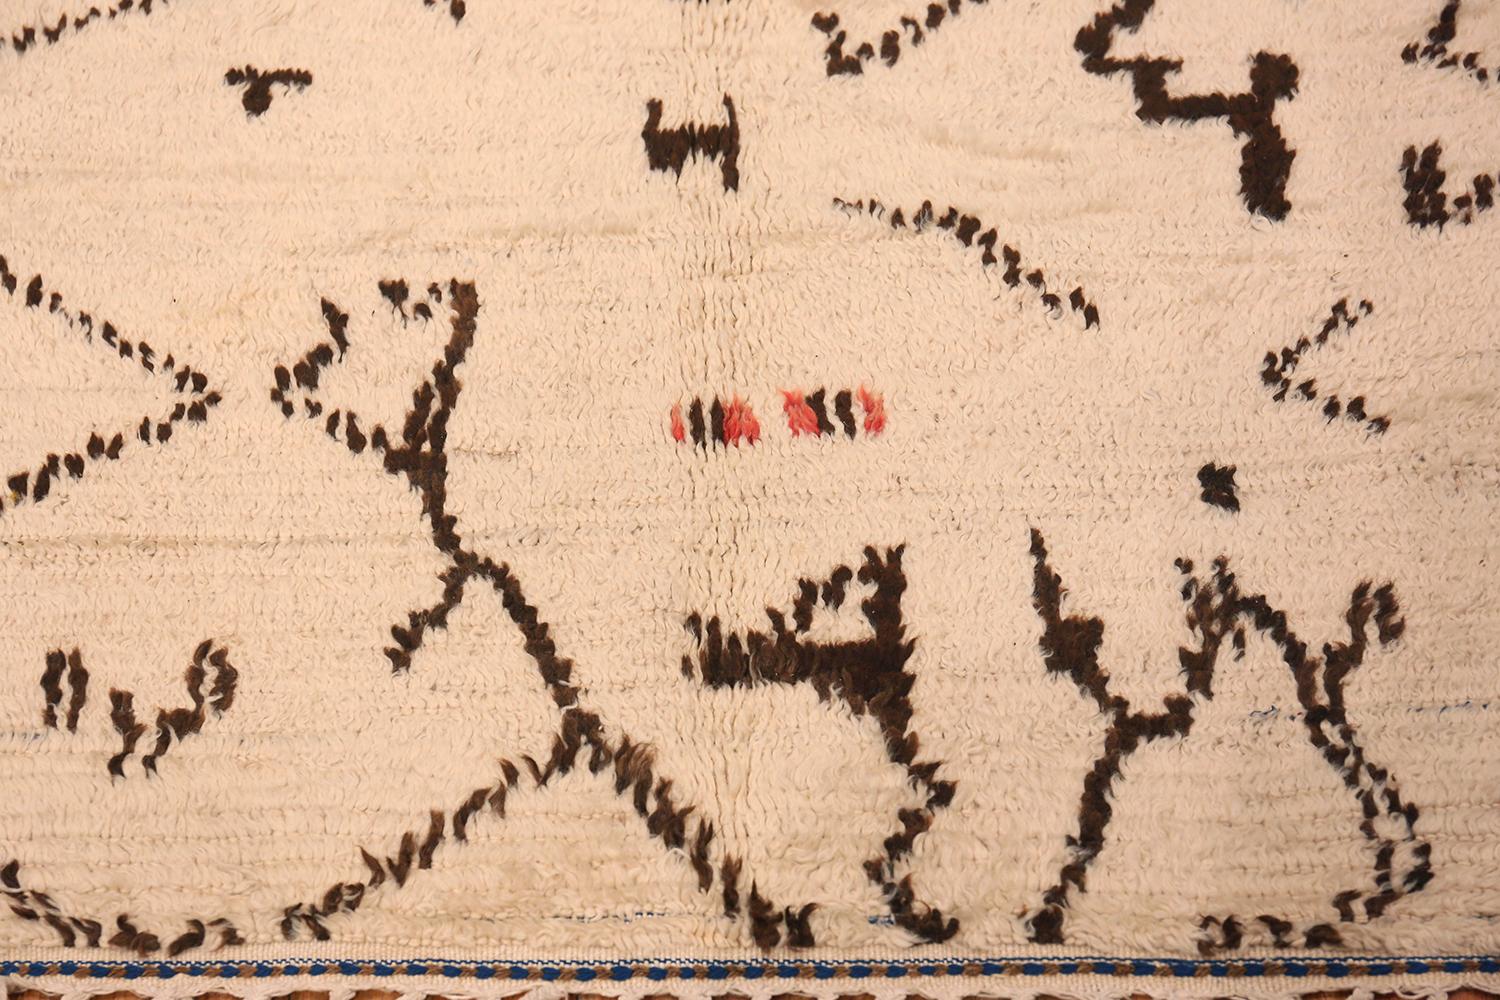 Beautiful Berber vintage Moroccan rug, country of origin: Morocco, date: circa mid-20th century. Size: 5 ft x 10 ft 3 in (1.52 m x 3.12 m).